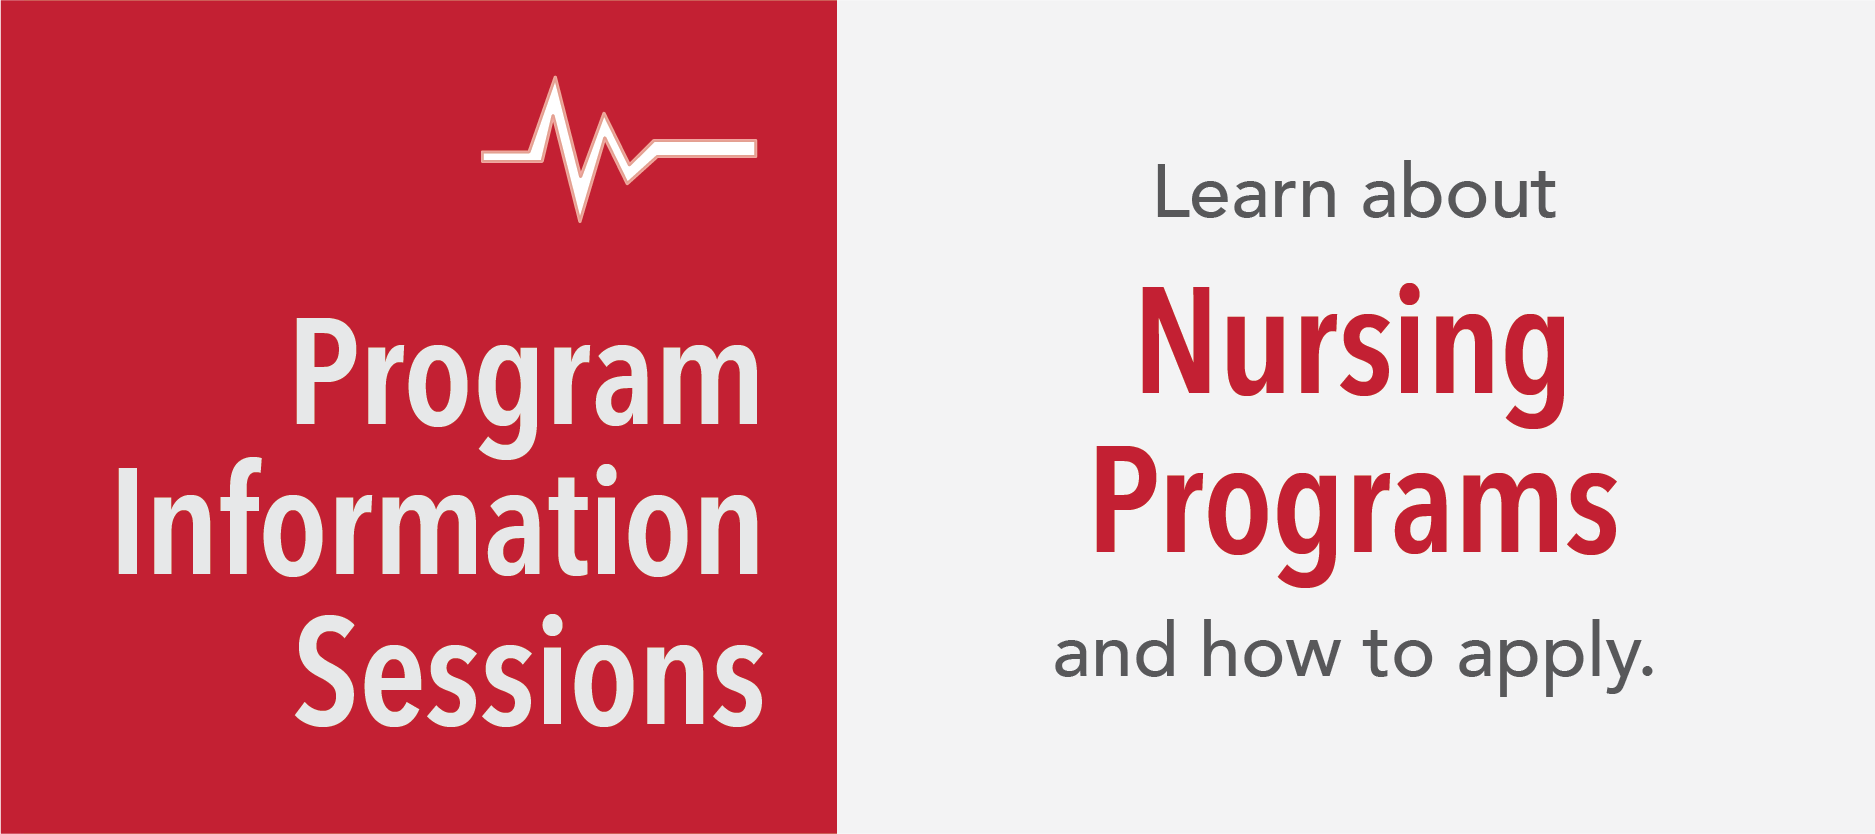 nursing program information sessions are a required prerequisite for entry into any nursing program at RCC